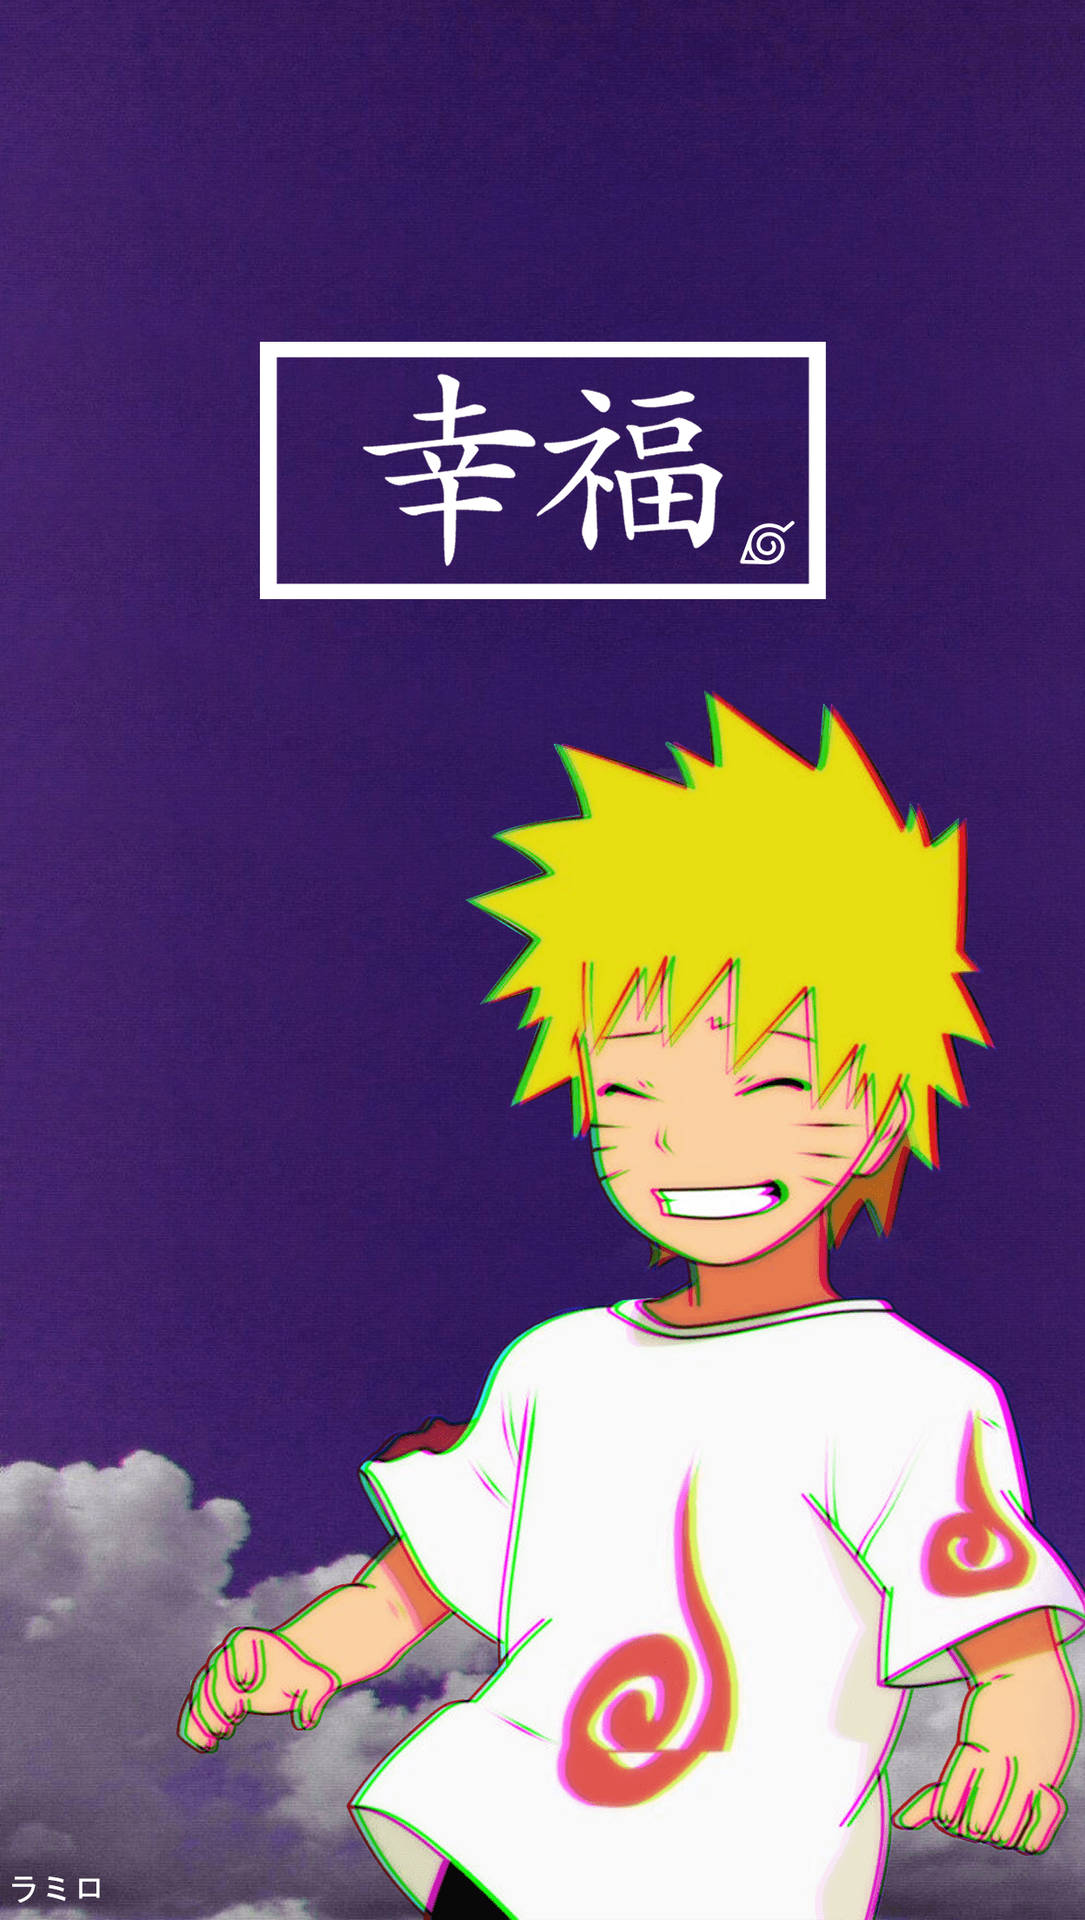 Young Naruto Violet Sky Aesthetic Wallpaper